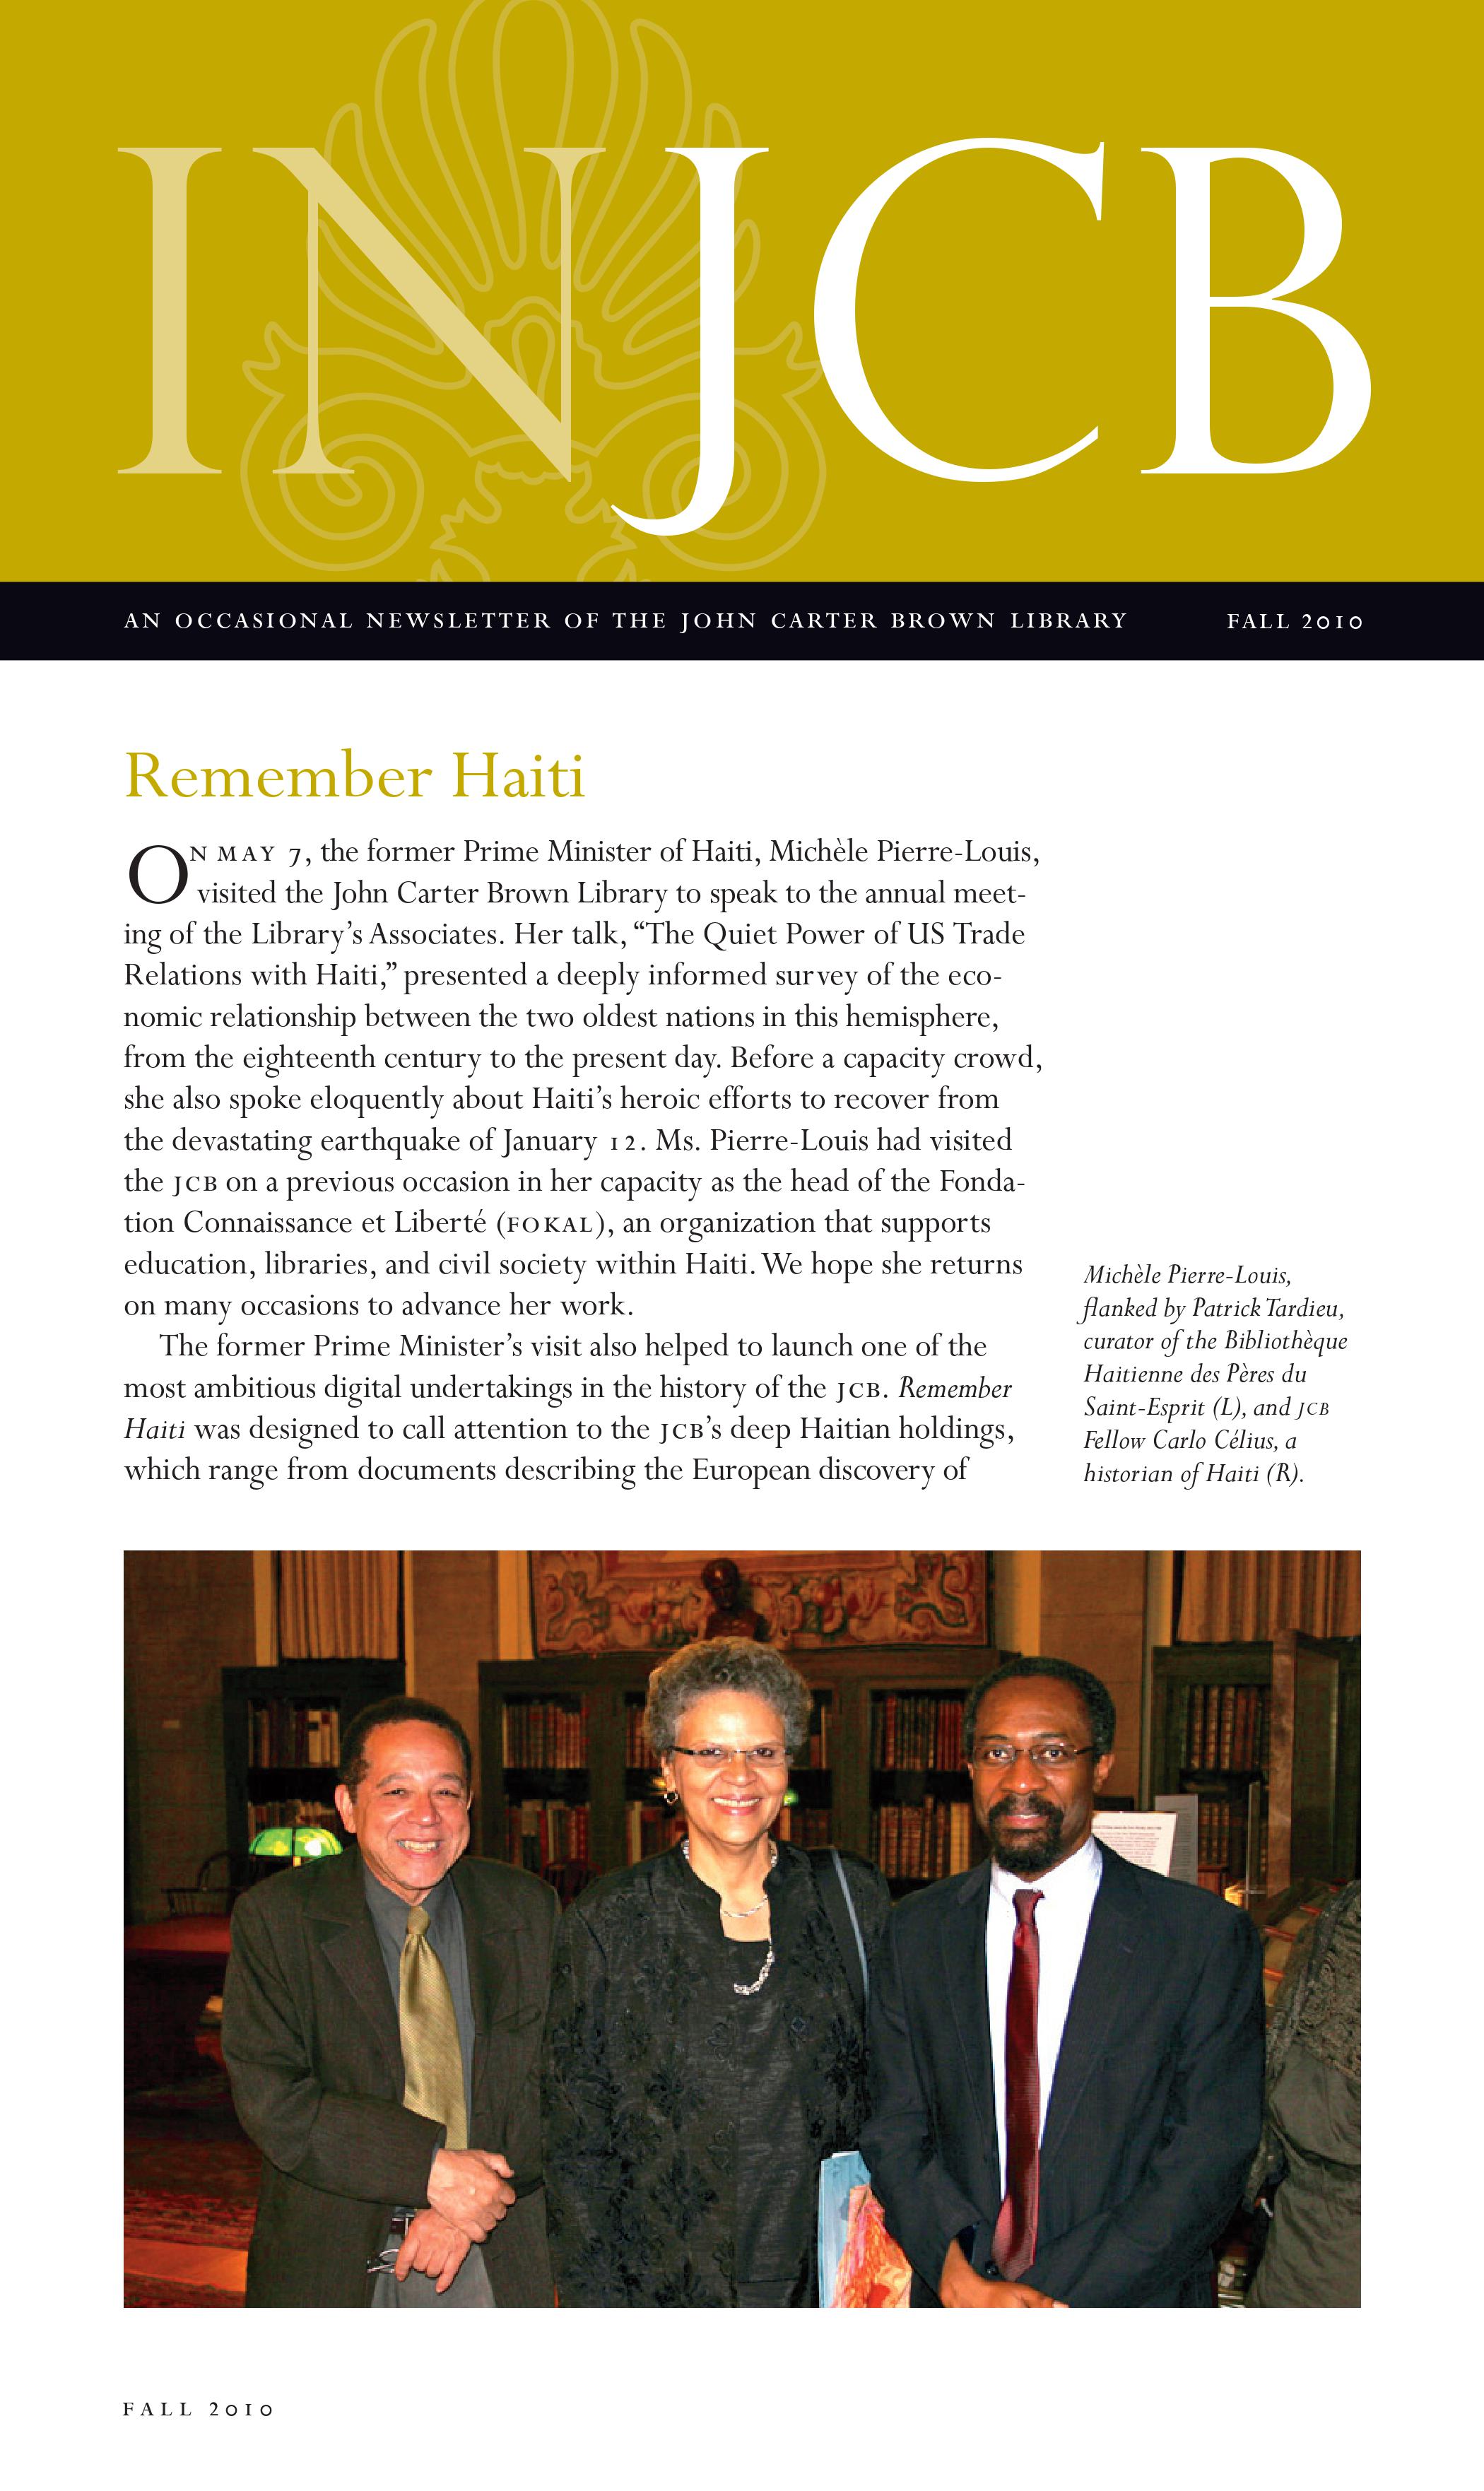 text of a newsletter and an image showing Michèle Pierre-Louis, Patrick Tardieu, and Carlo Célius